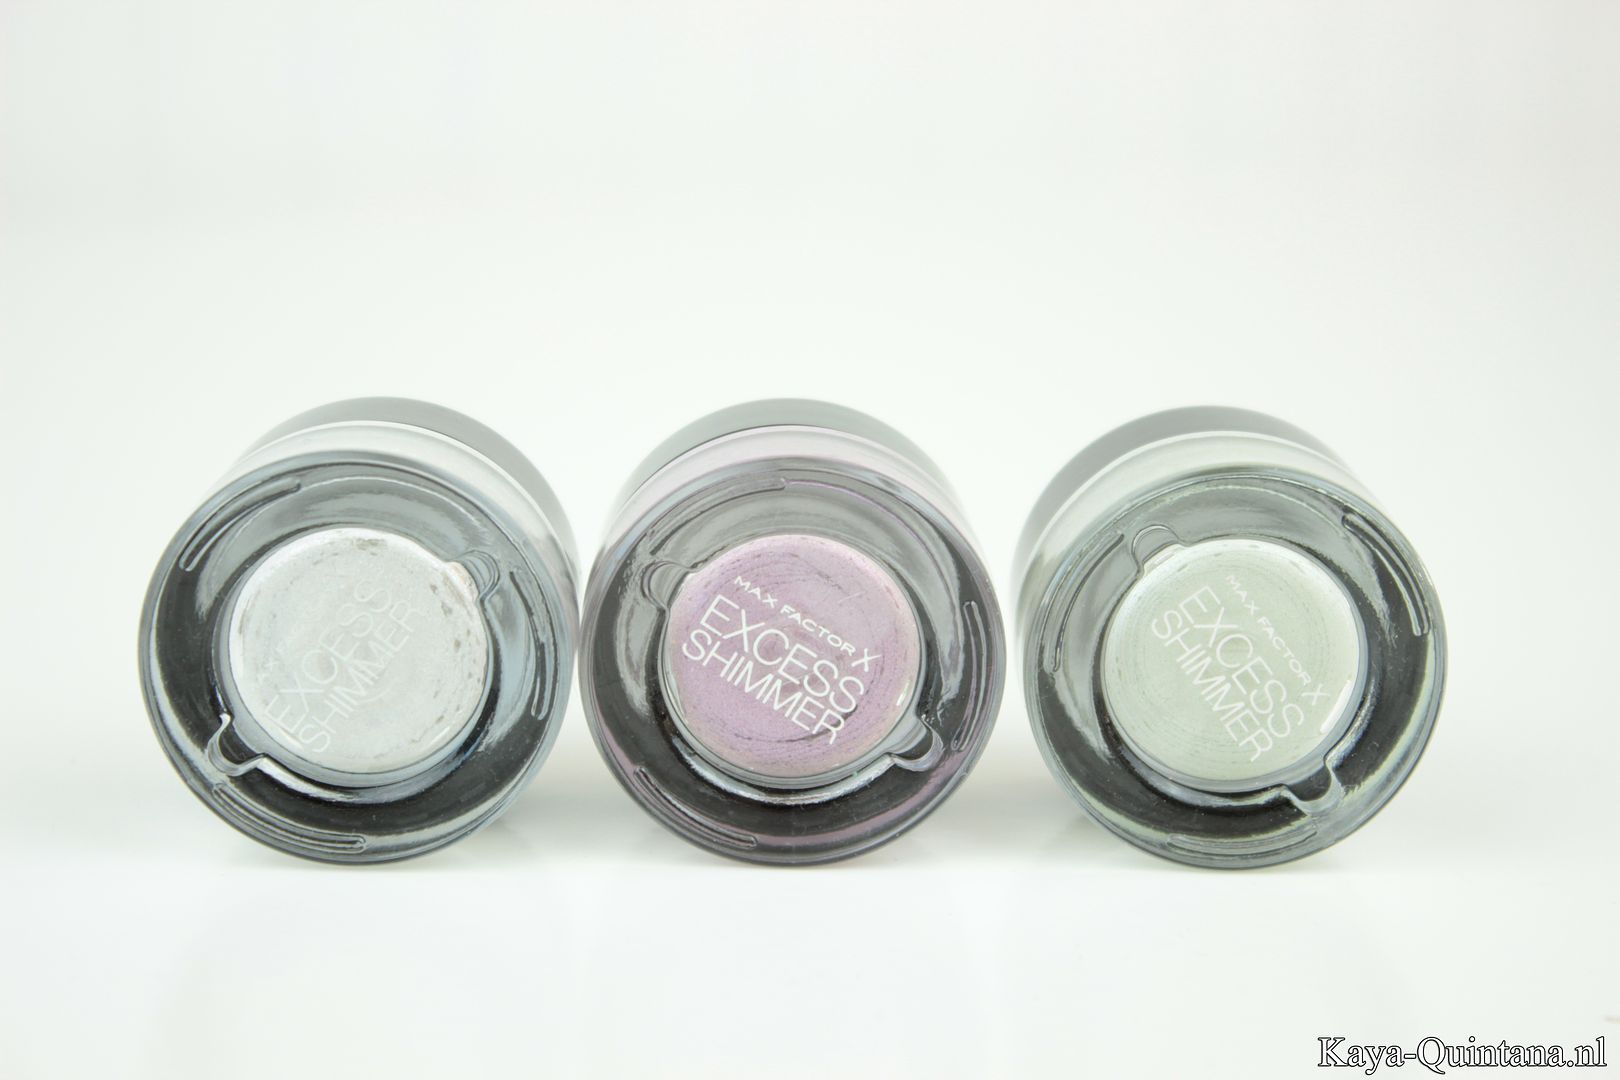 max factor excess shimmer eyeshadow